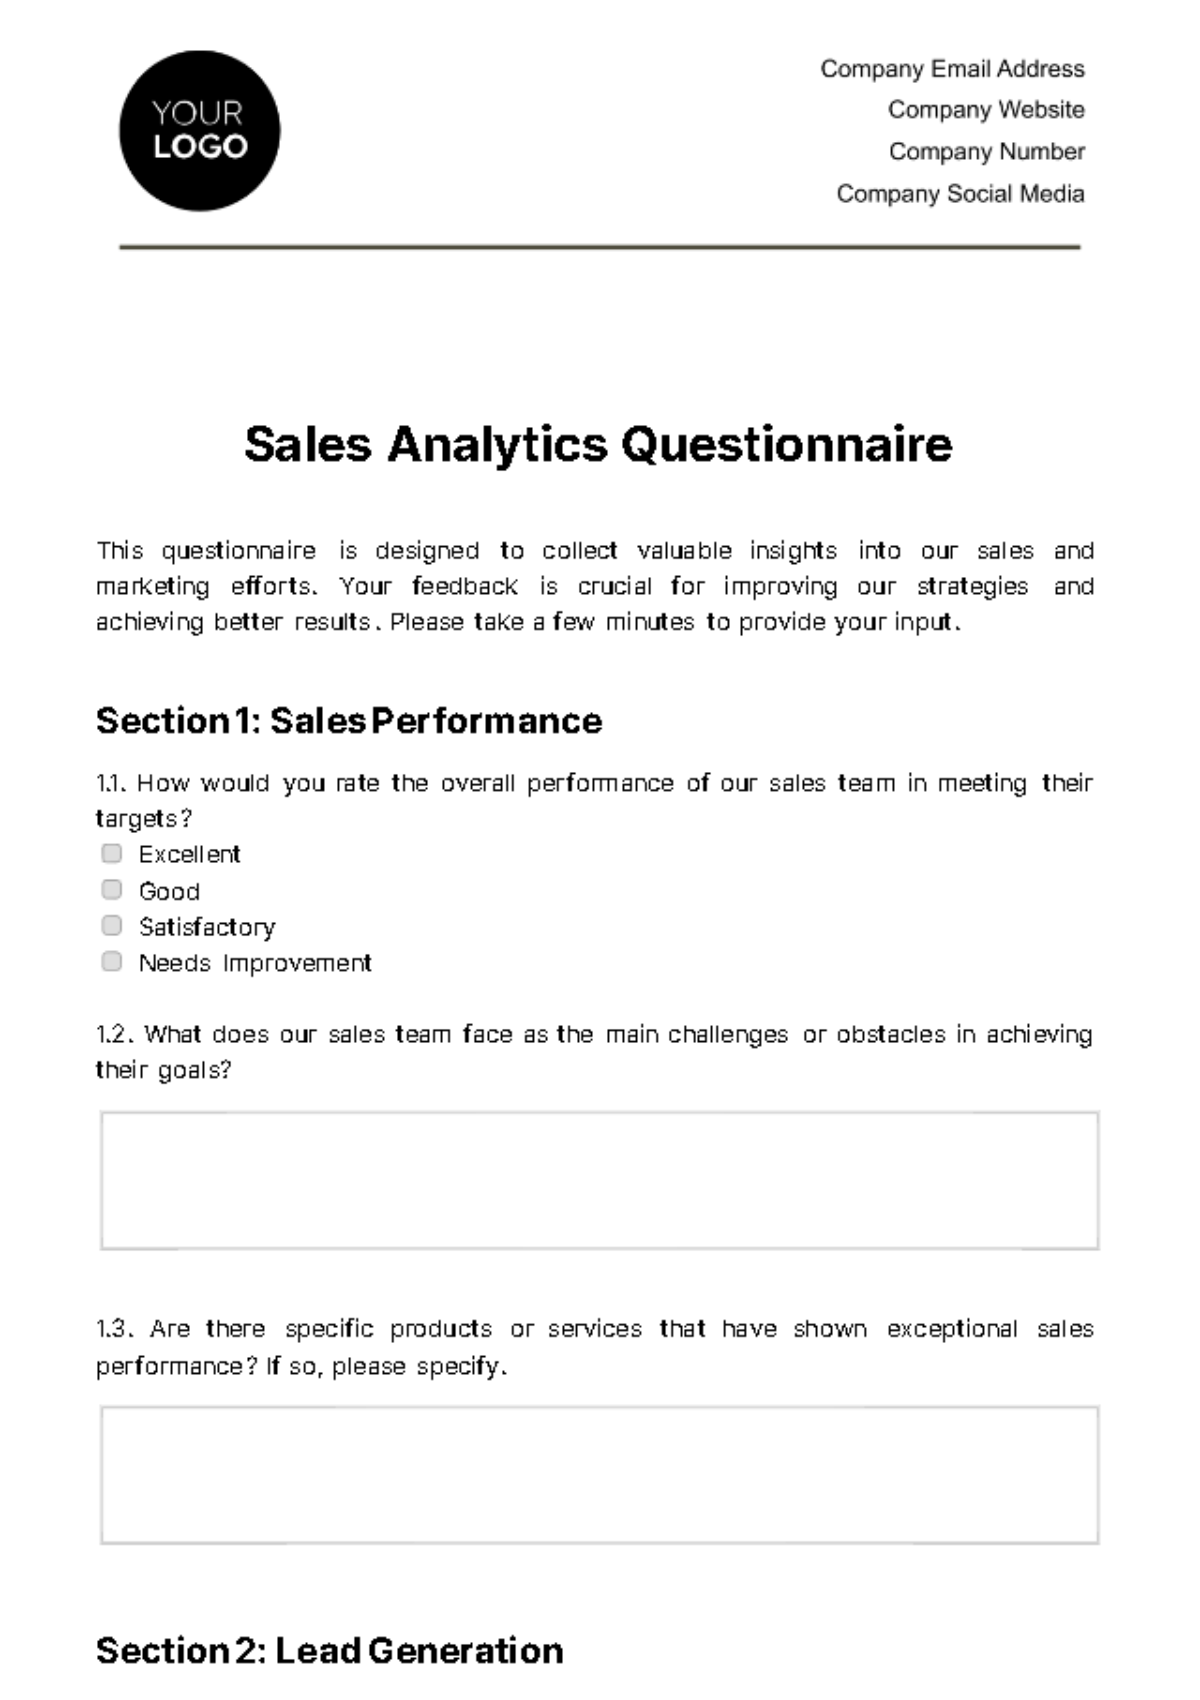 Sales Analytics Questionnaire Template